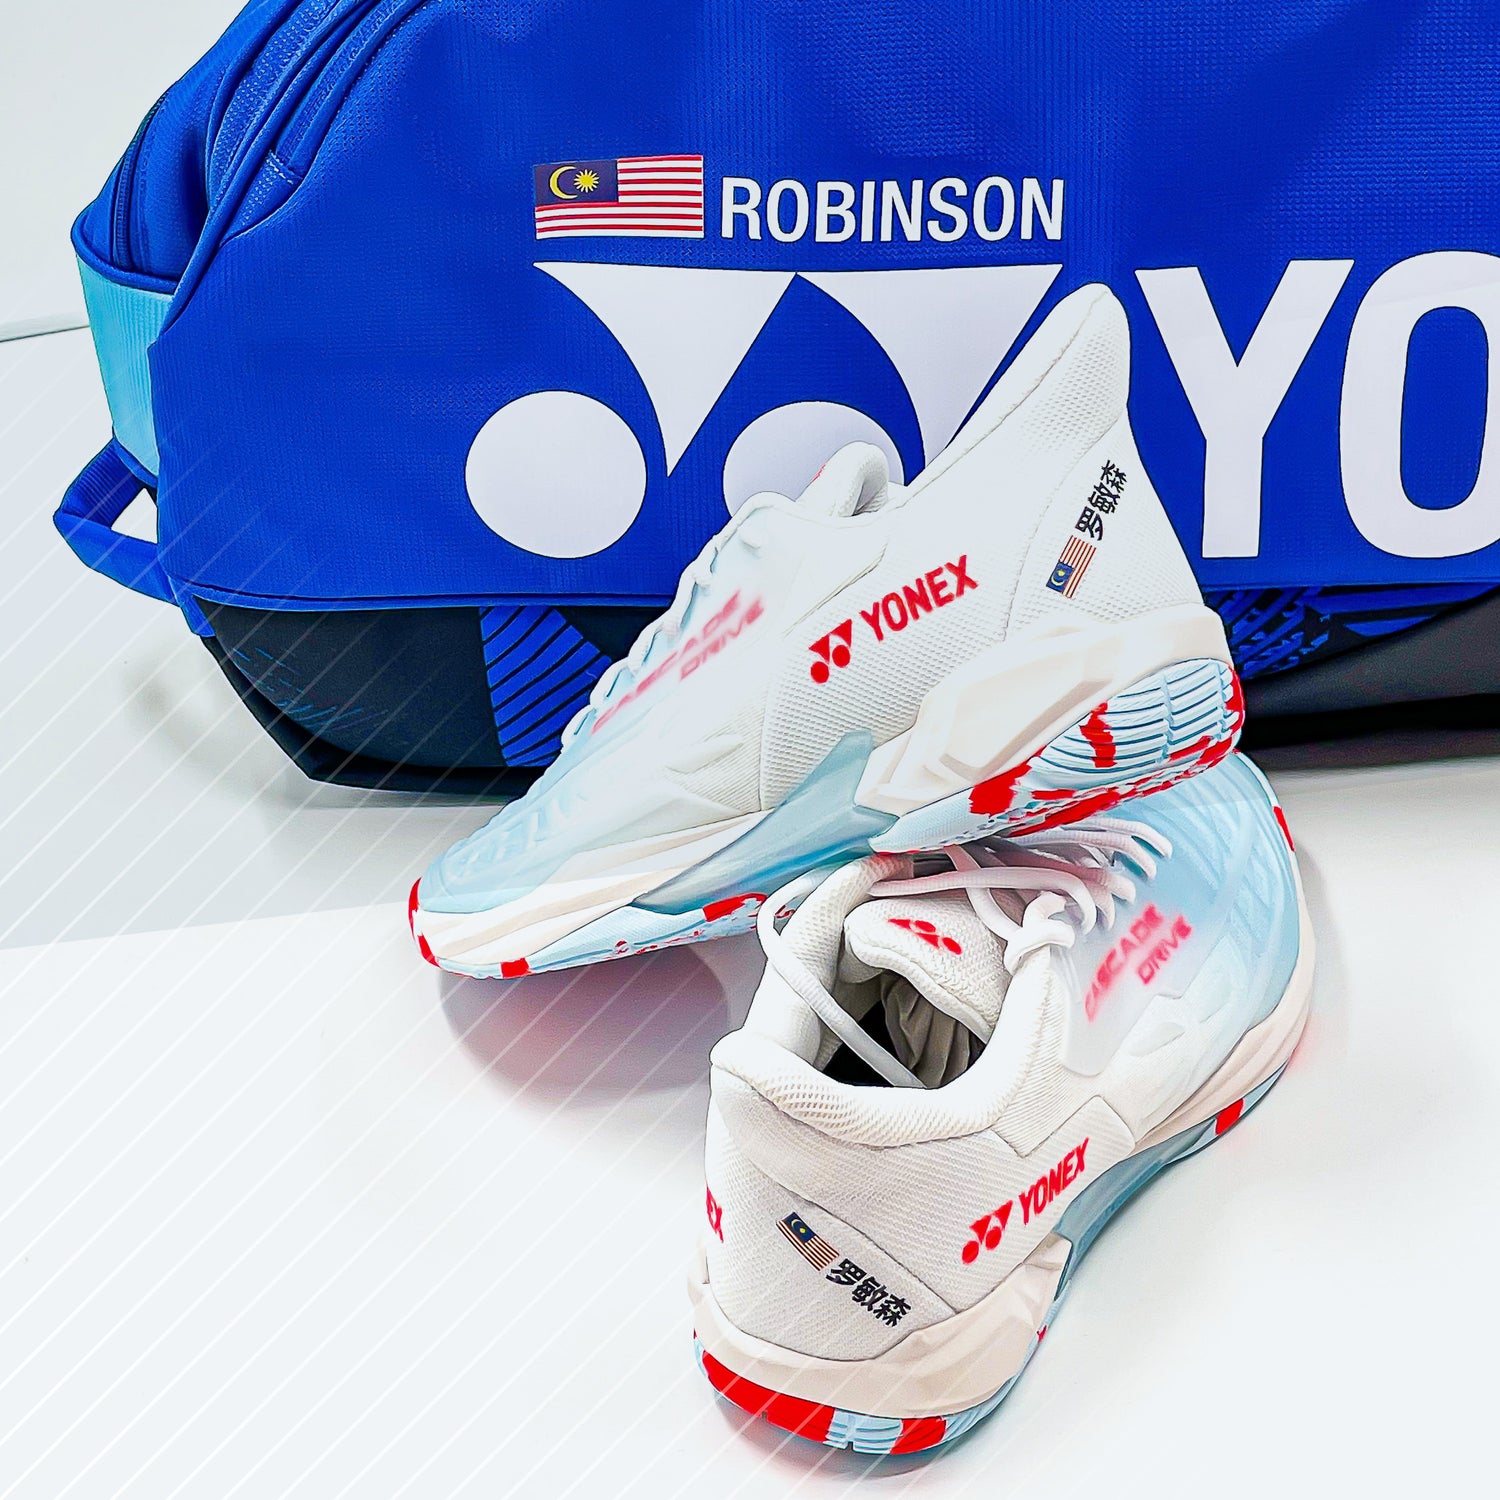 Elevate Your Badminton Game with Unmatched Personalisation